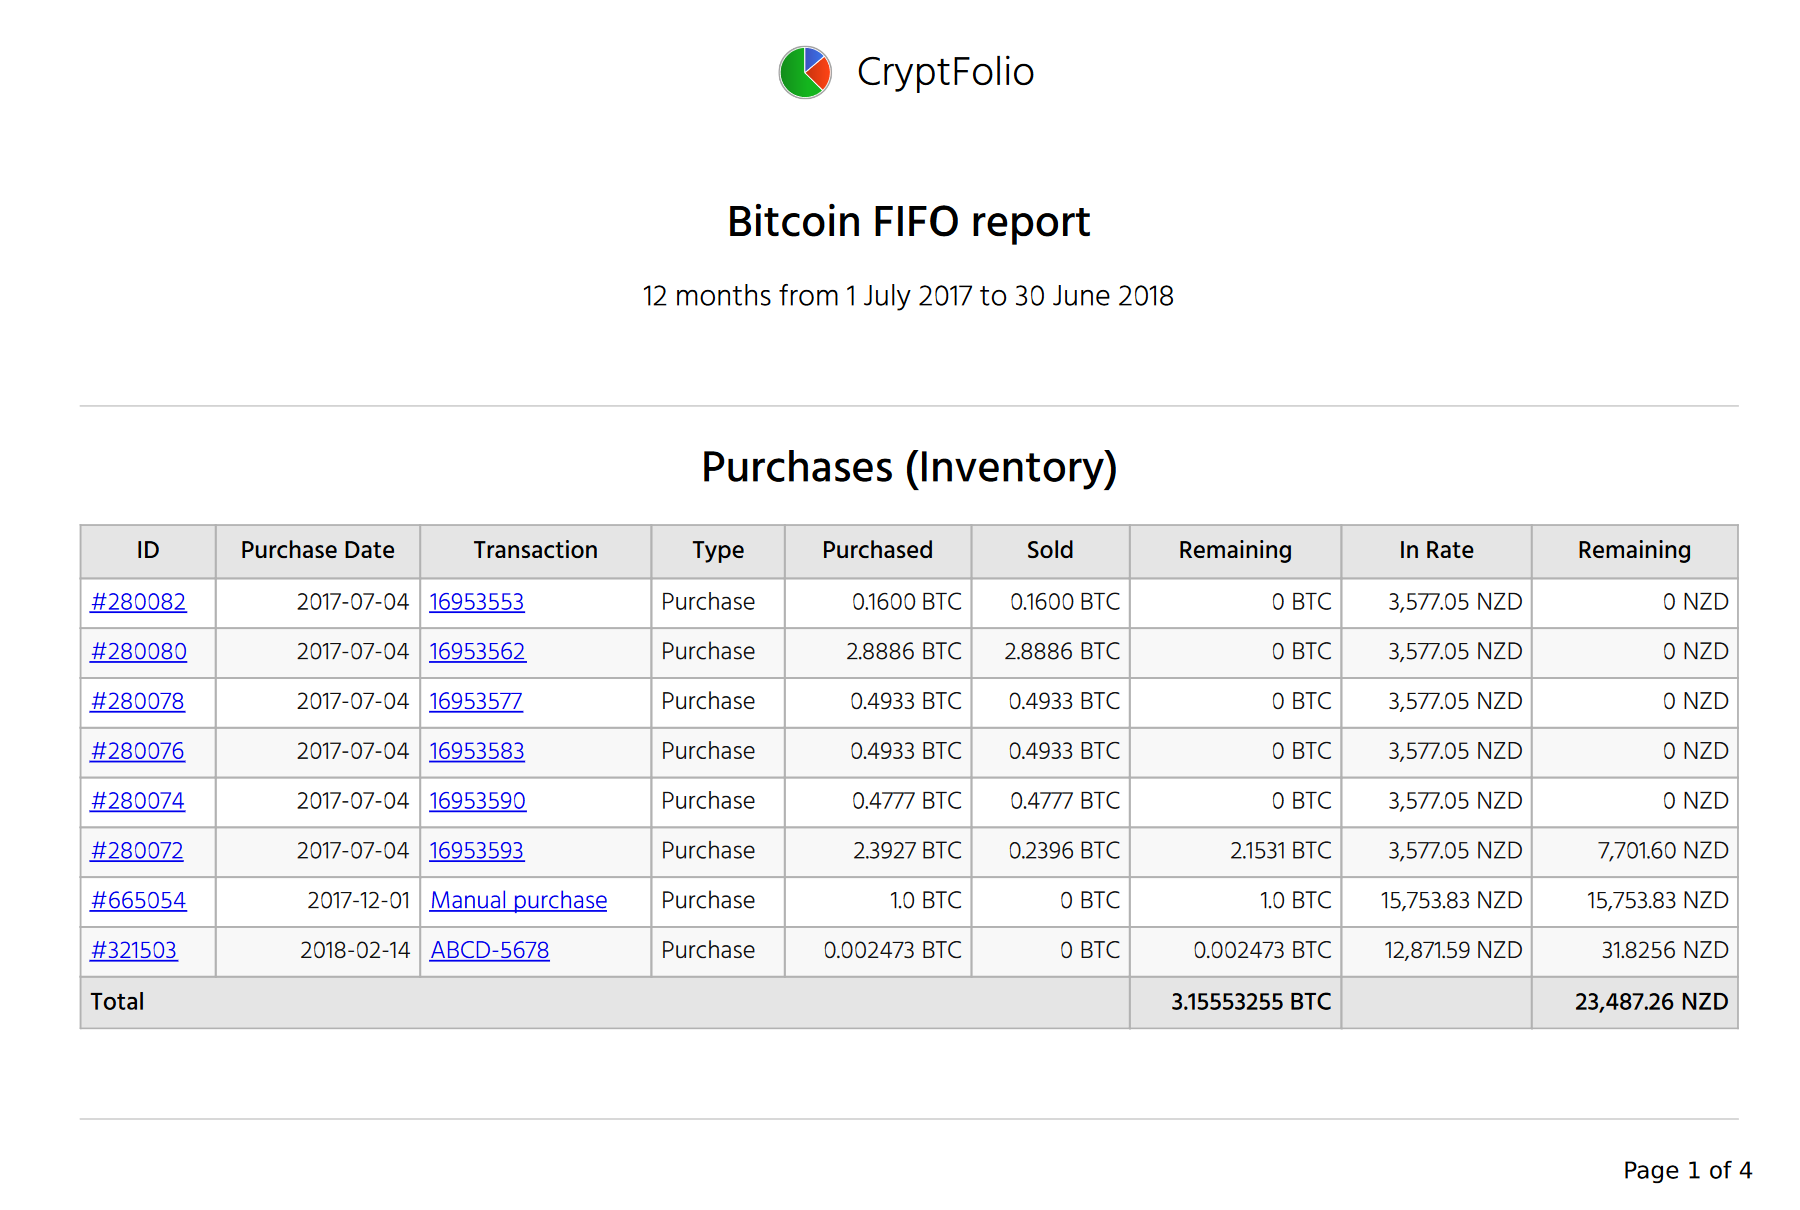 Screenshot of the first page of a sample FIFO report, as exported to PDF by CryptFolio. The FIFO report is showing the dates covered in the report, and a list of purchases (inventory) in the report period.